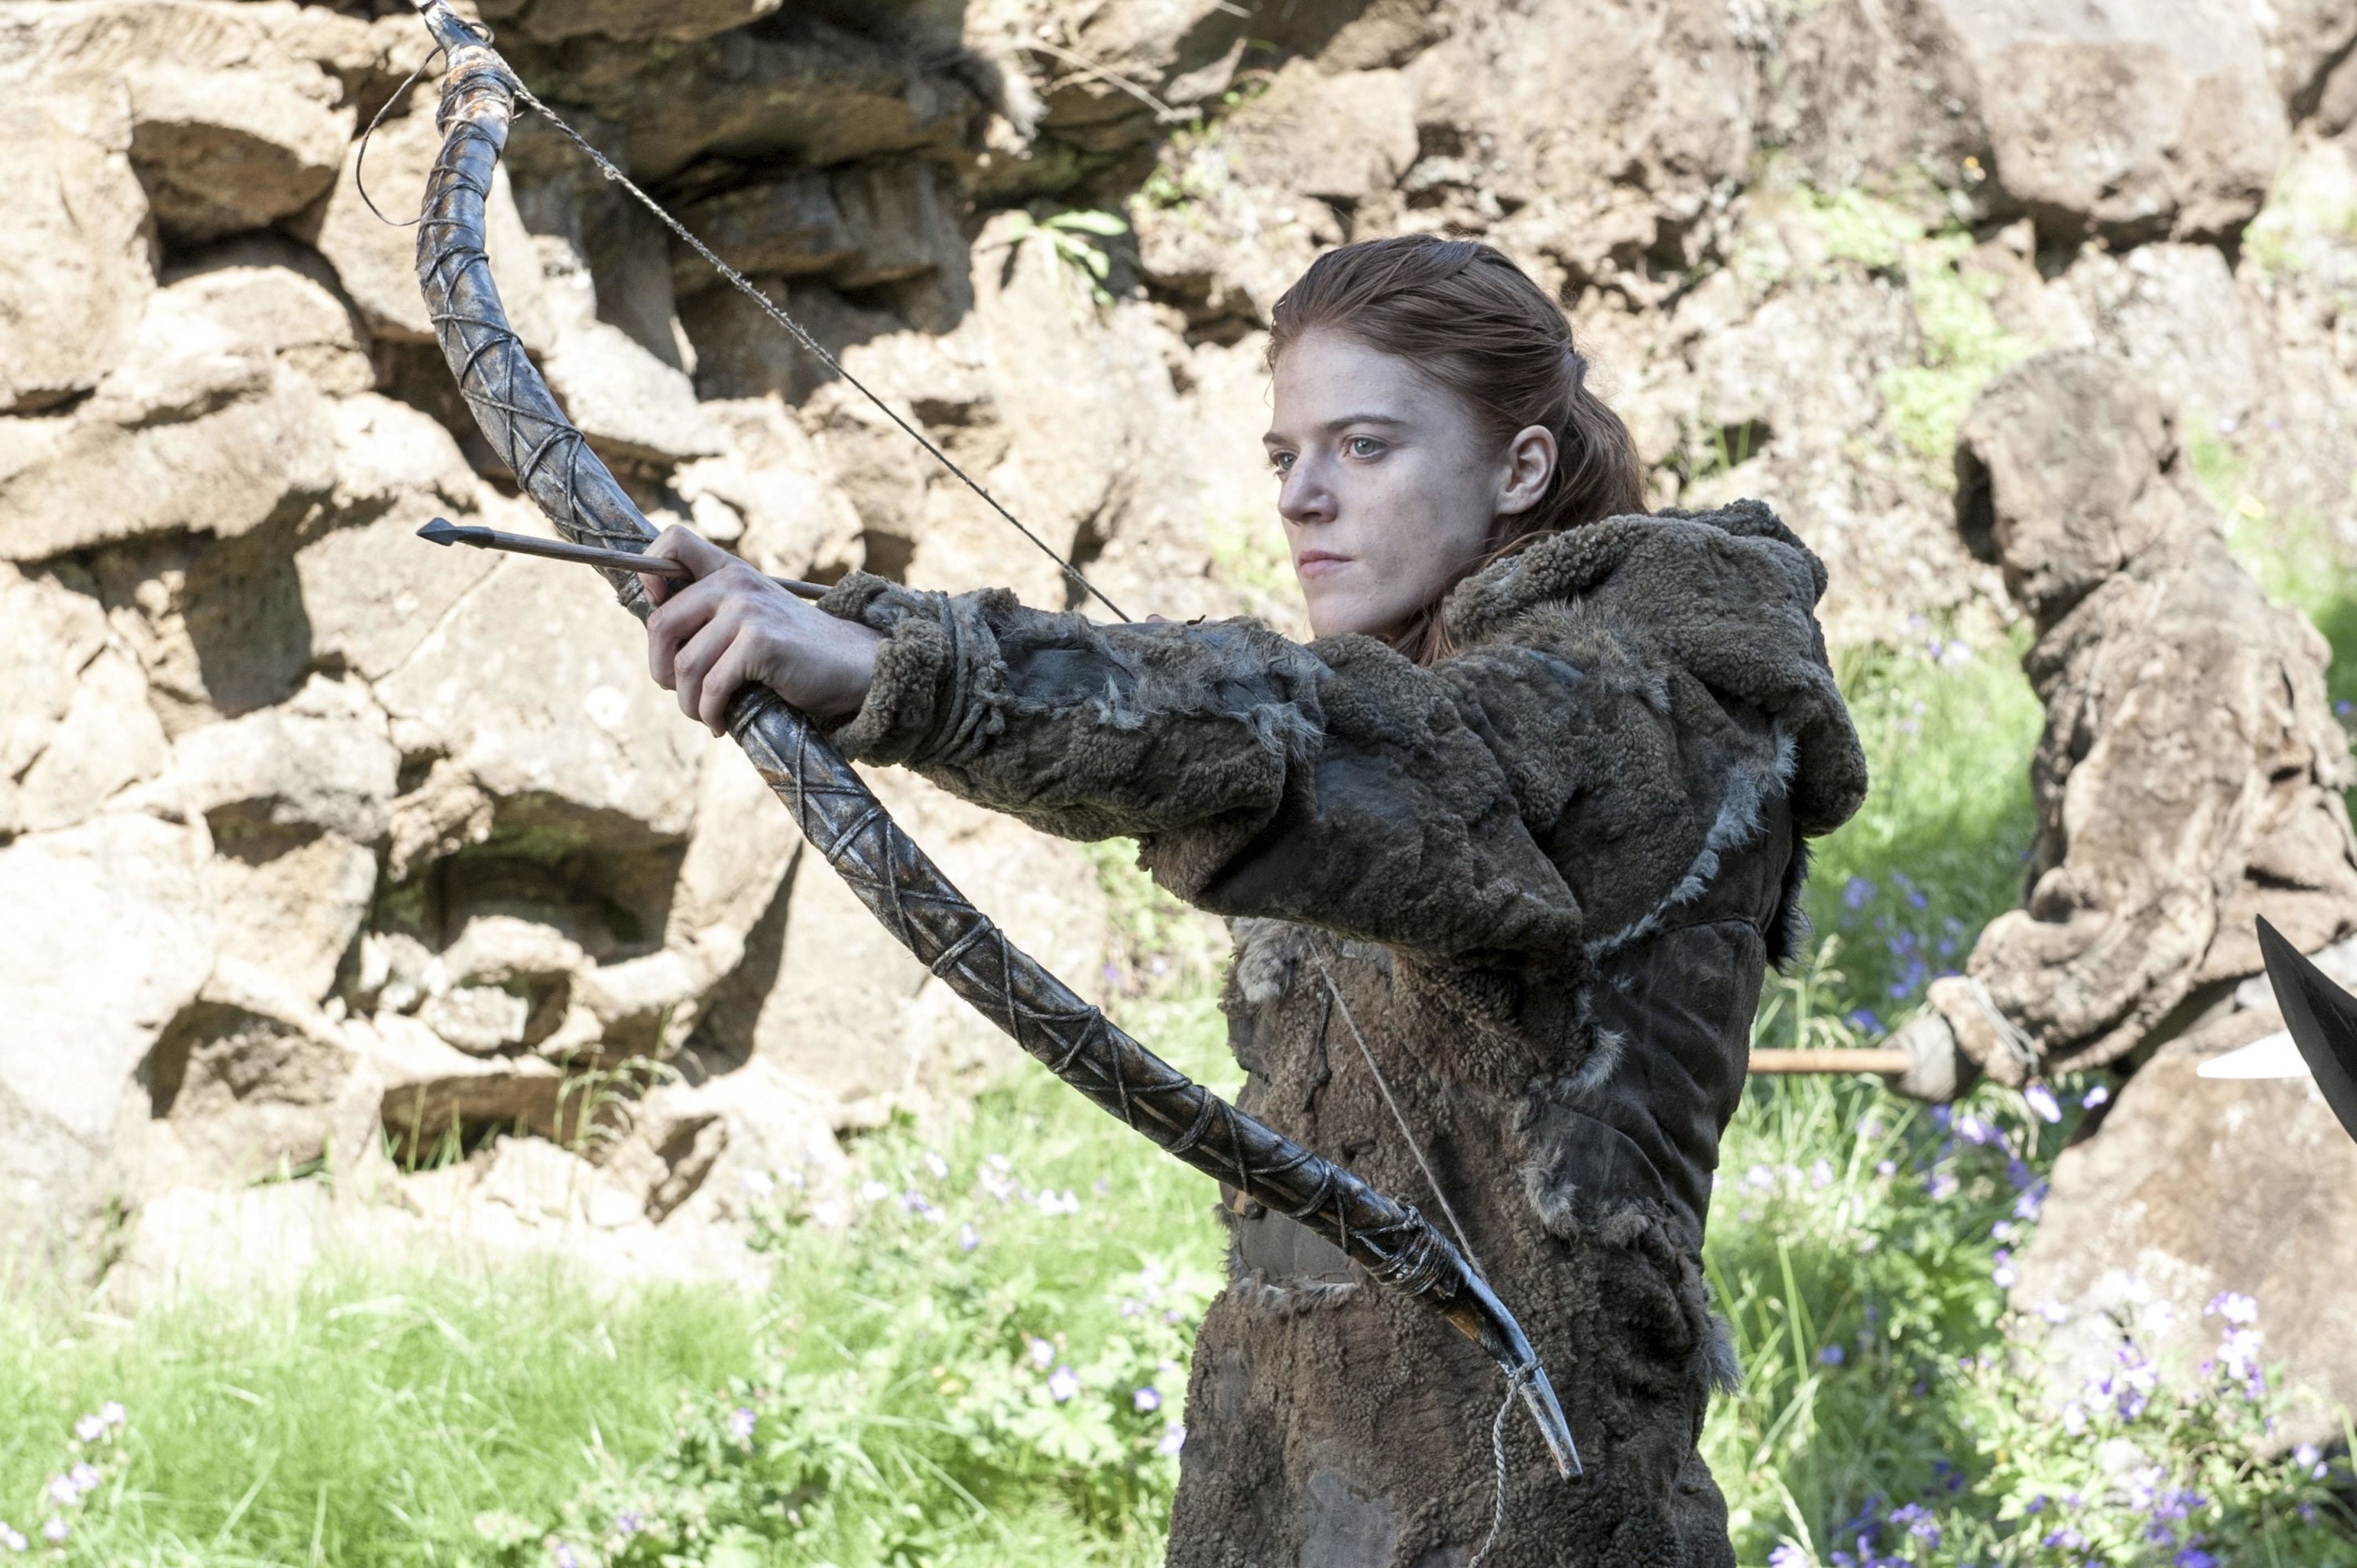 Rose Leslie as Ygritte in “Game of Thrones”